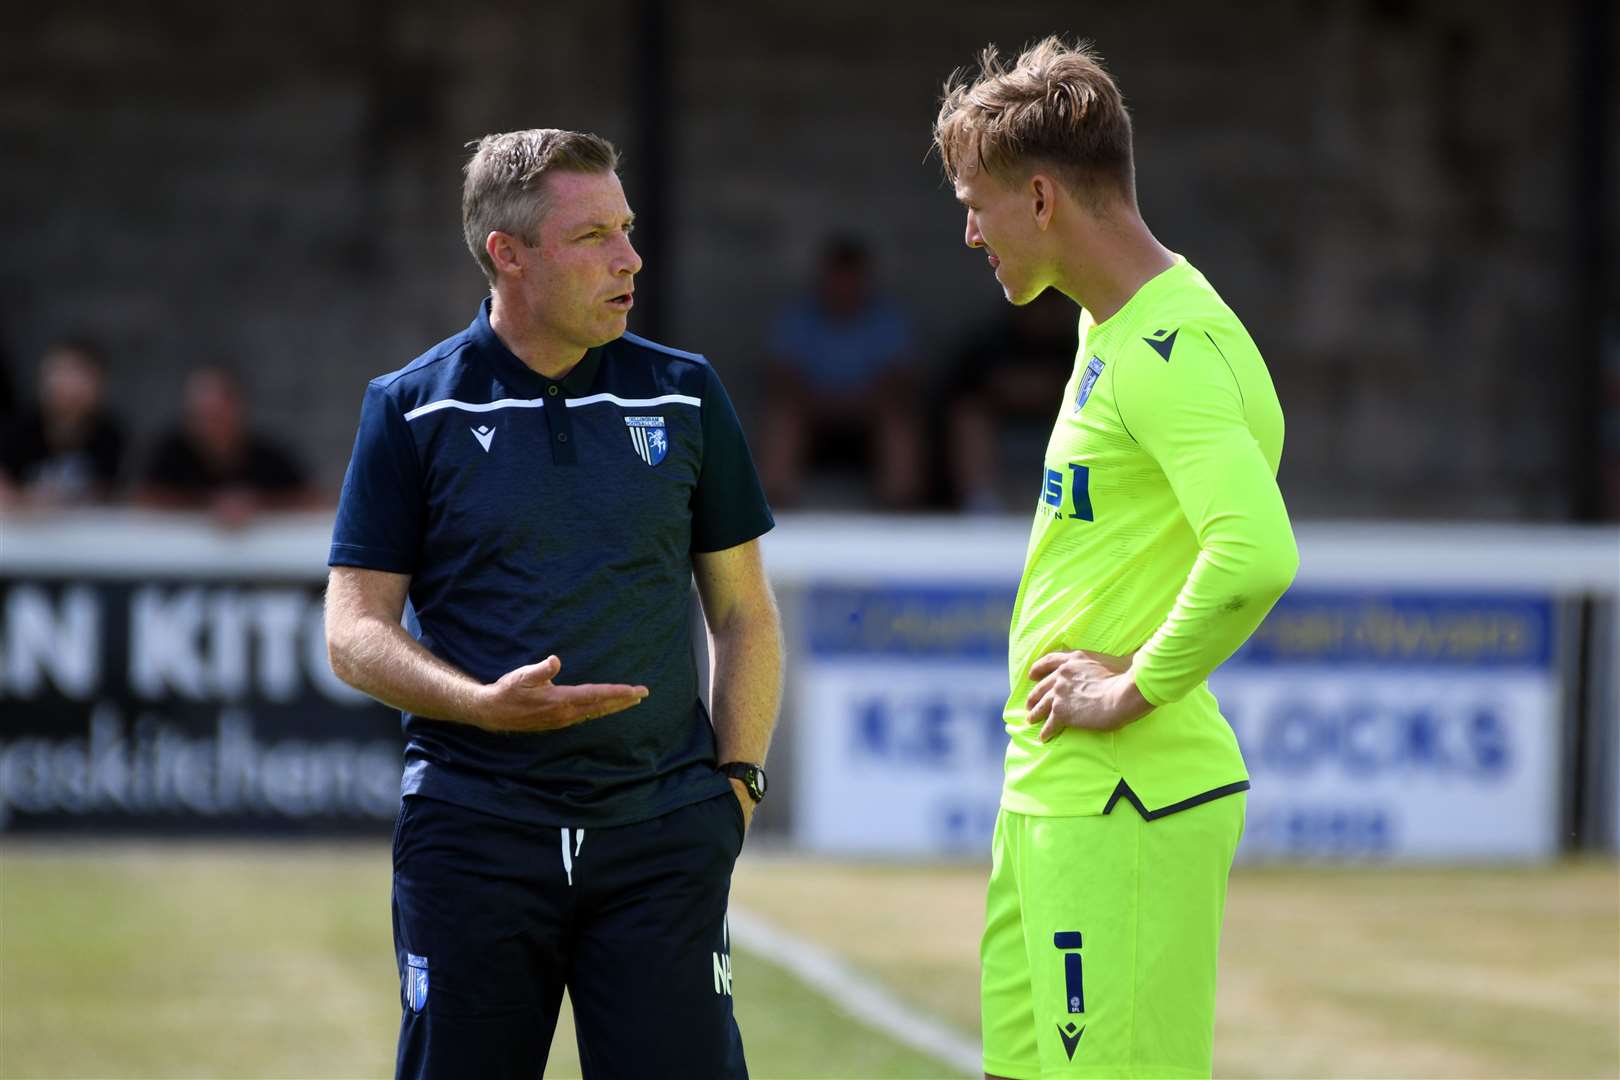 Gillingham manager Neil Harris chatting with goalkeeper Ashley Maynard-Brewer. The Charlton goalie is fit again after a summer injury Picture: Barry Goodwin